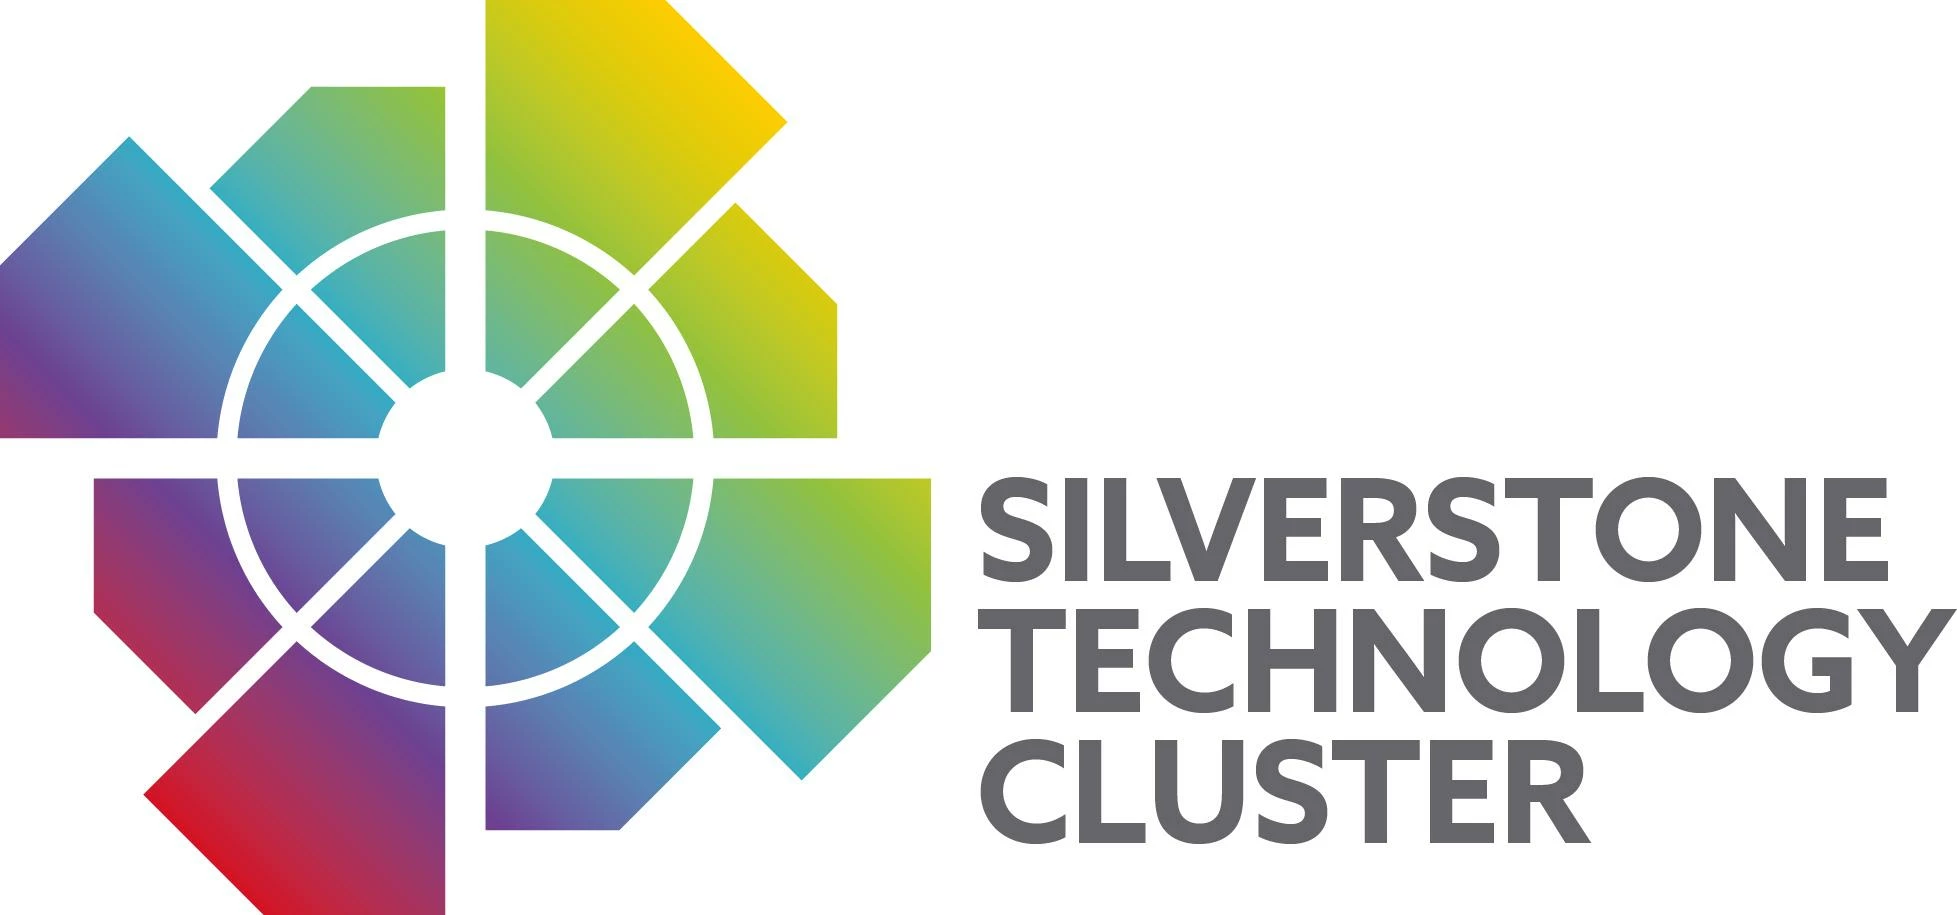 Silverstone Technology Cluster will support high-tech activity within a one-hour radius of Silversto